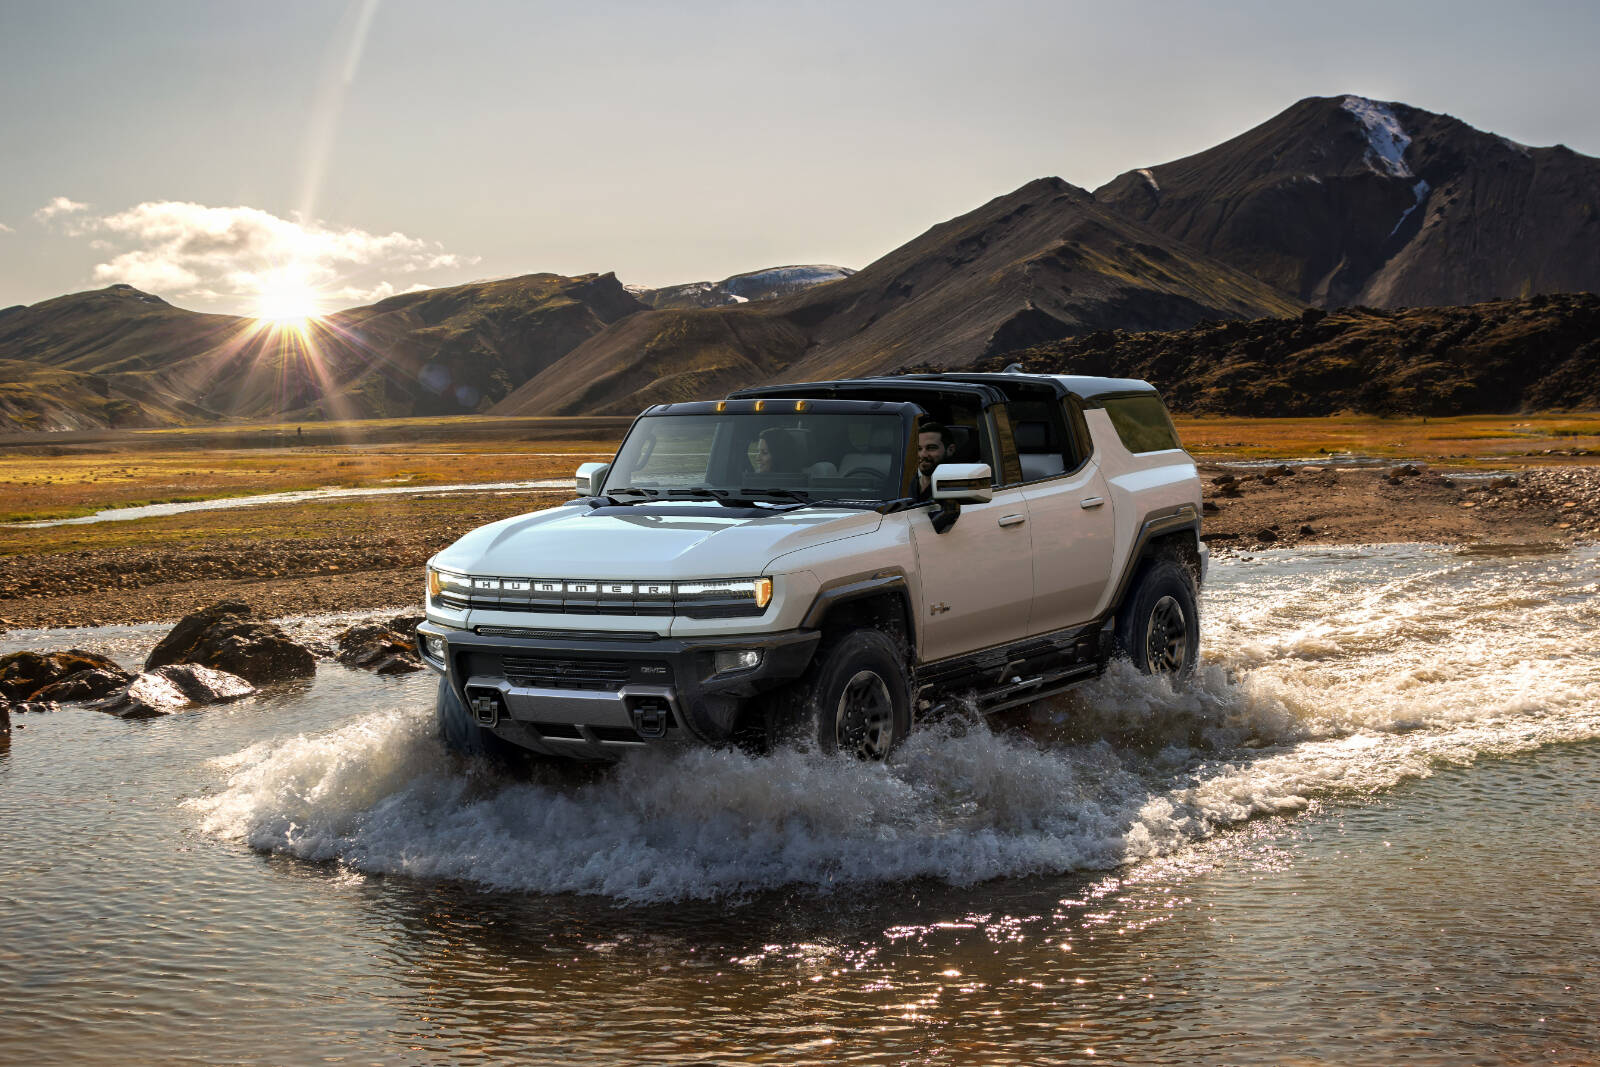 The GMC HUMMER EV SUV completes the HUMMER EV family and features a 126.7-inch wheelbase for tight proportions and a maneuverable body, providing remarkable on- and off-road capability. Photo courtesy GMC